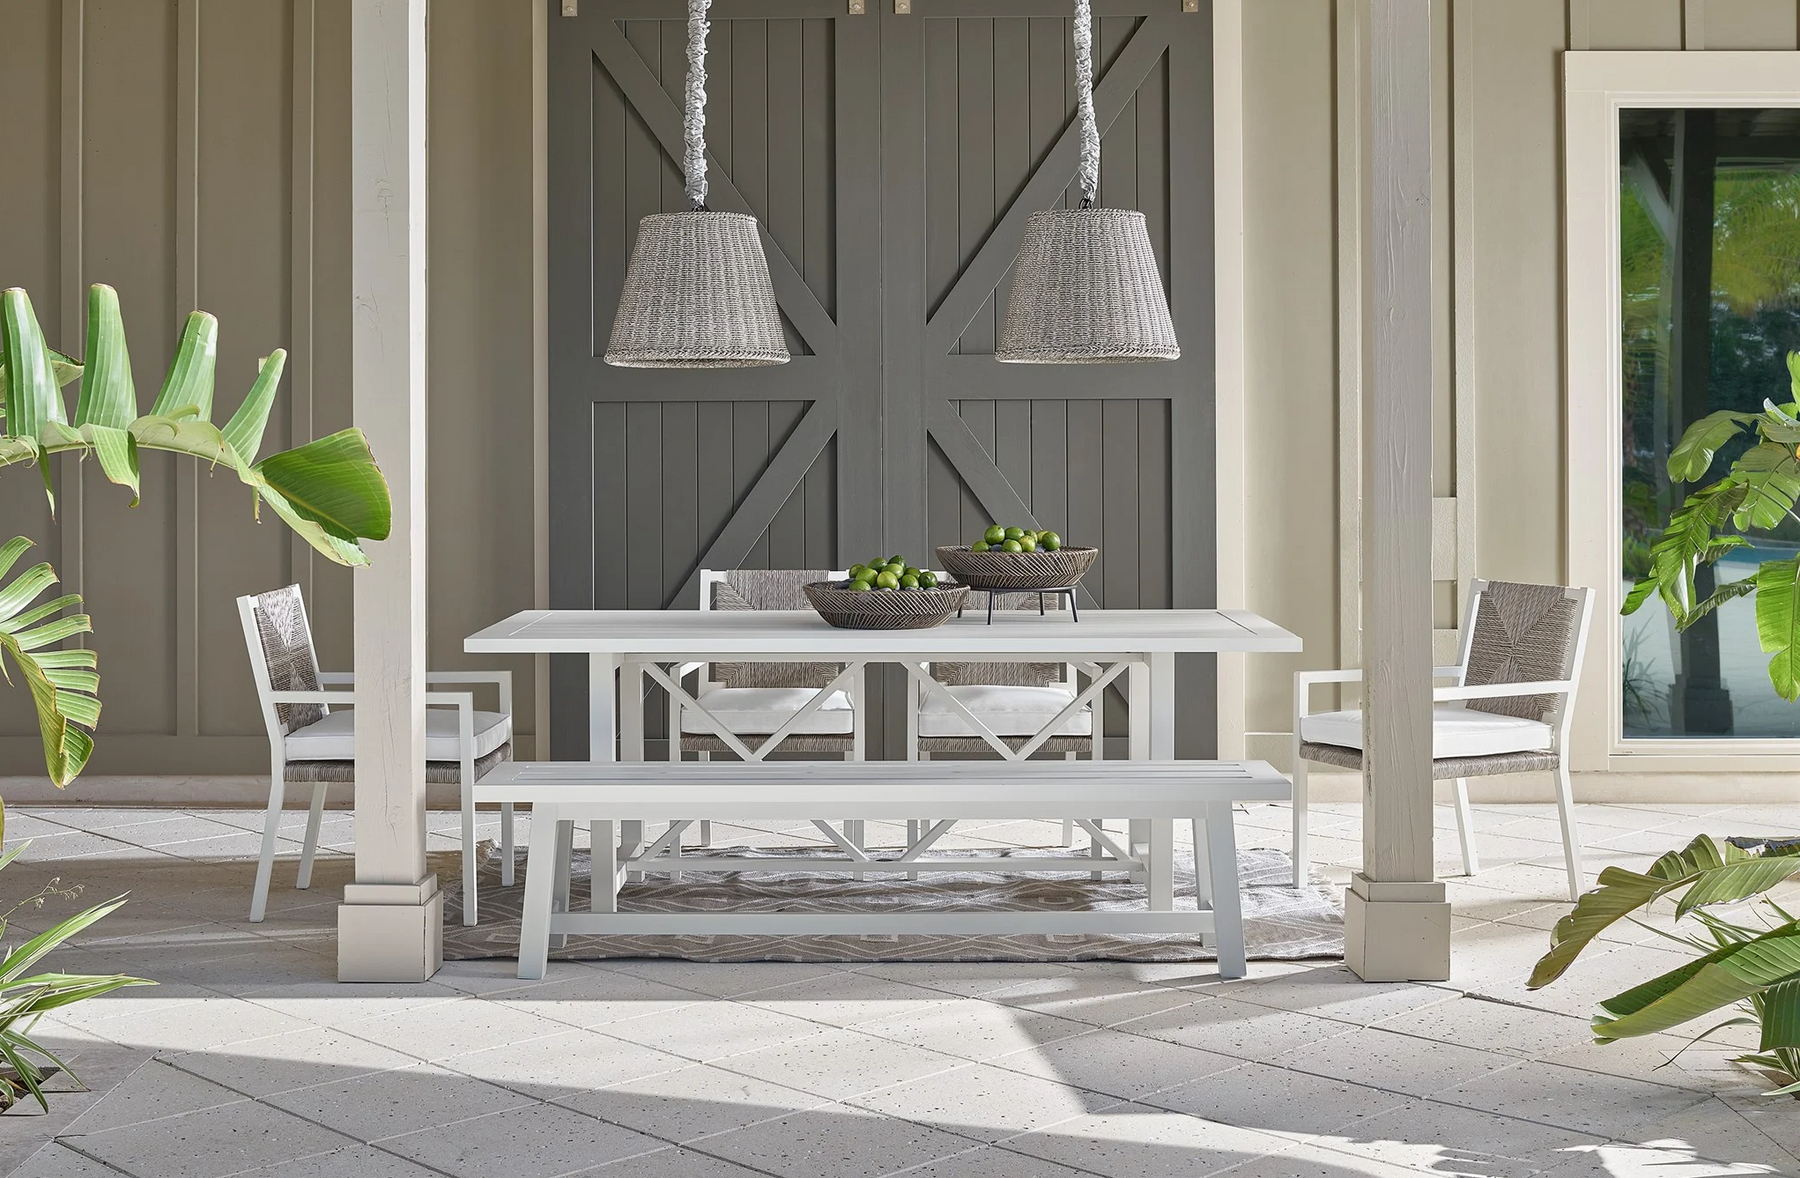 Redecorate Your Outdoors With Coastal Living Outdoor Furniture Collection